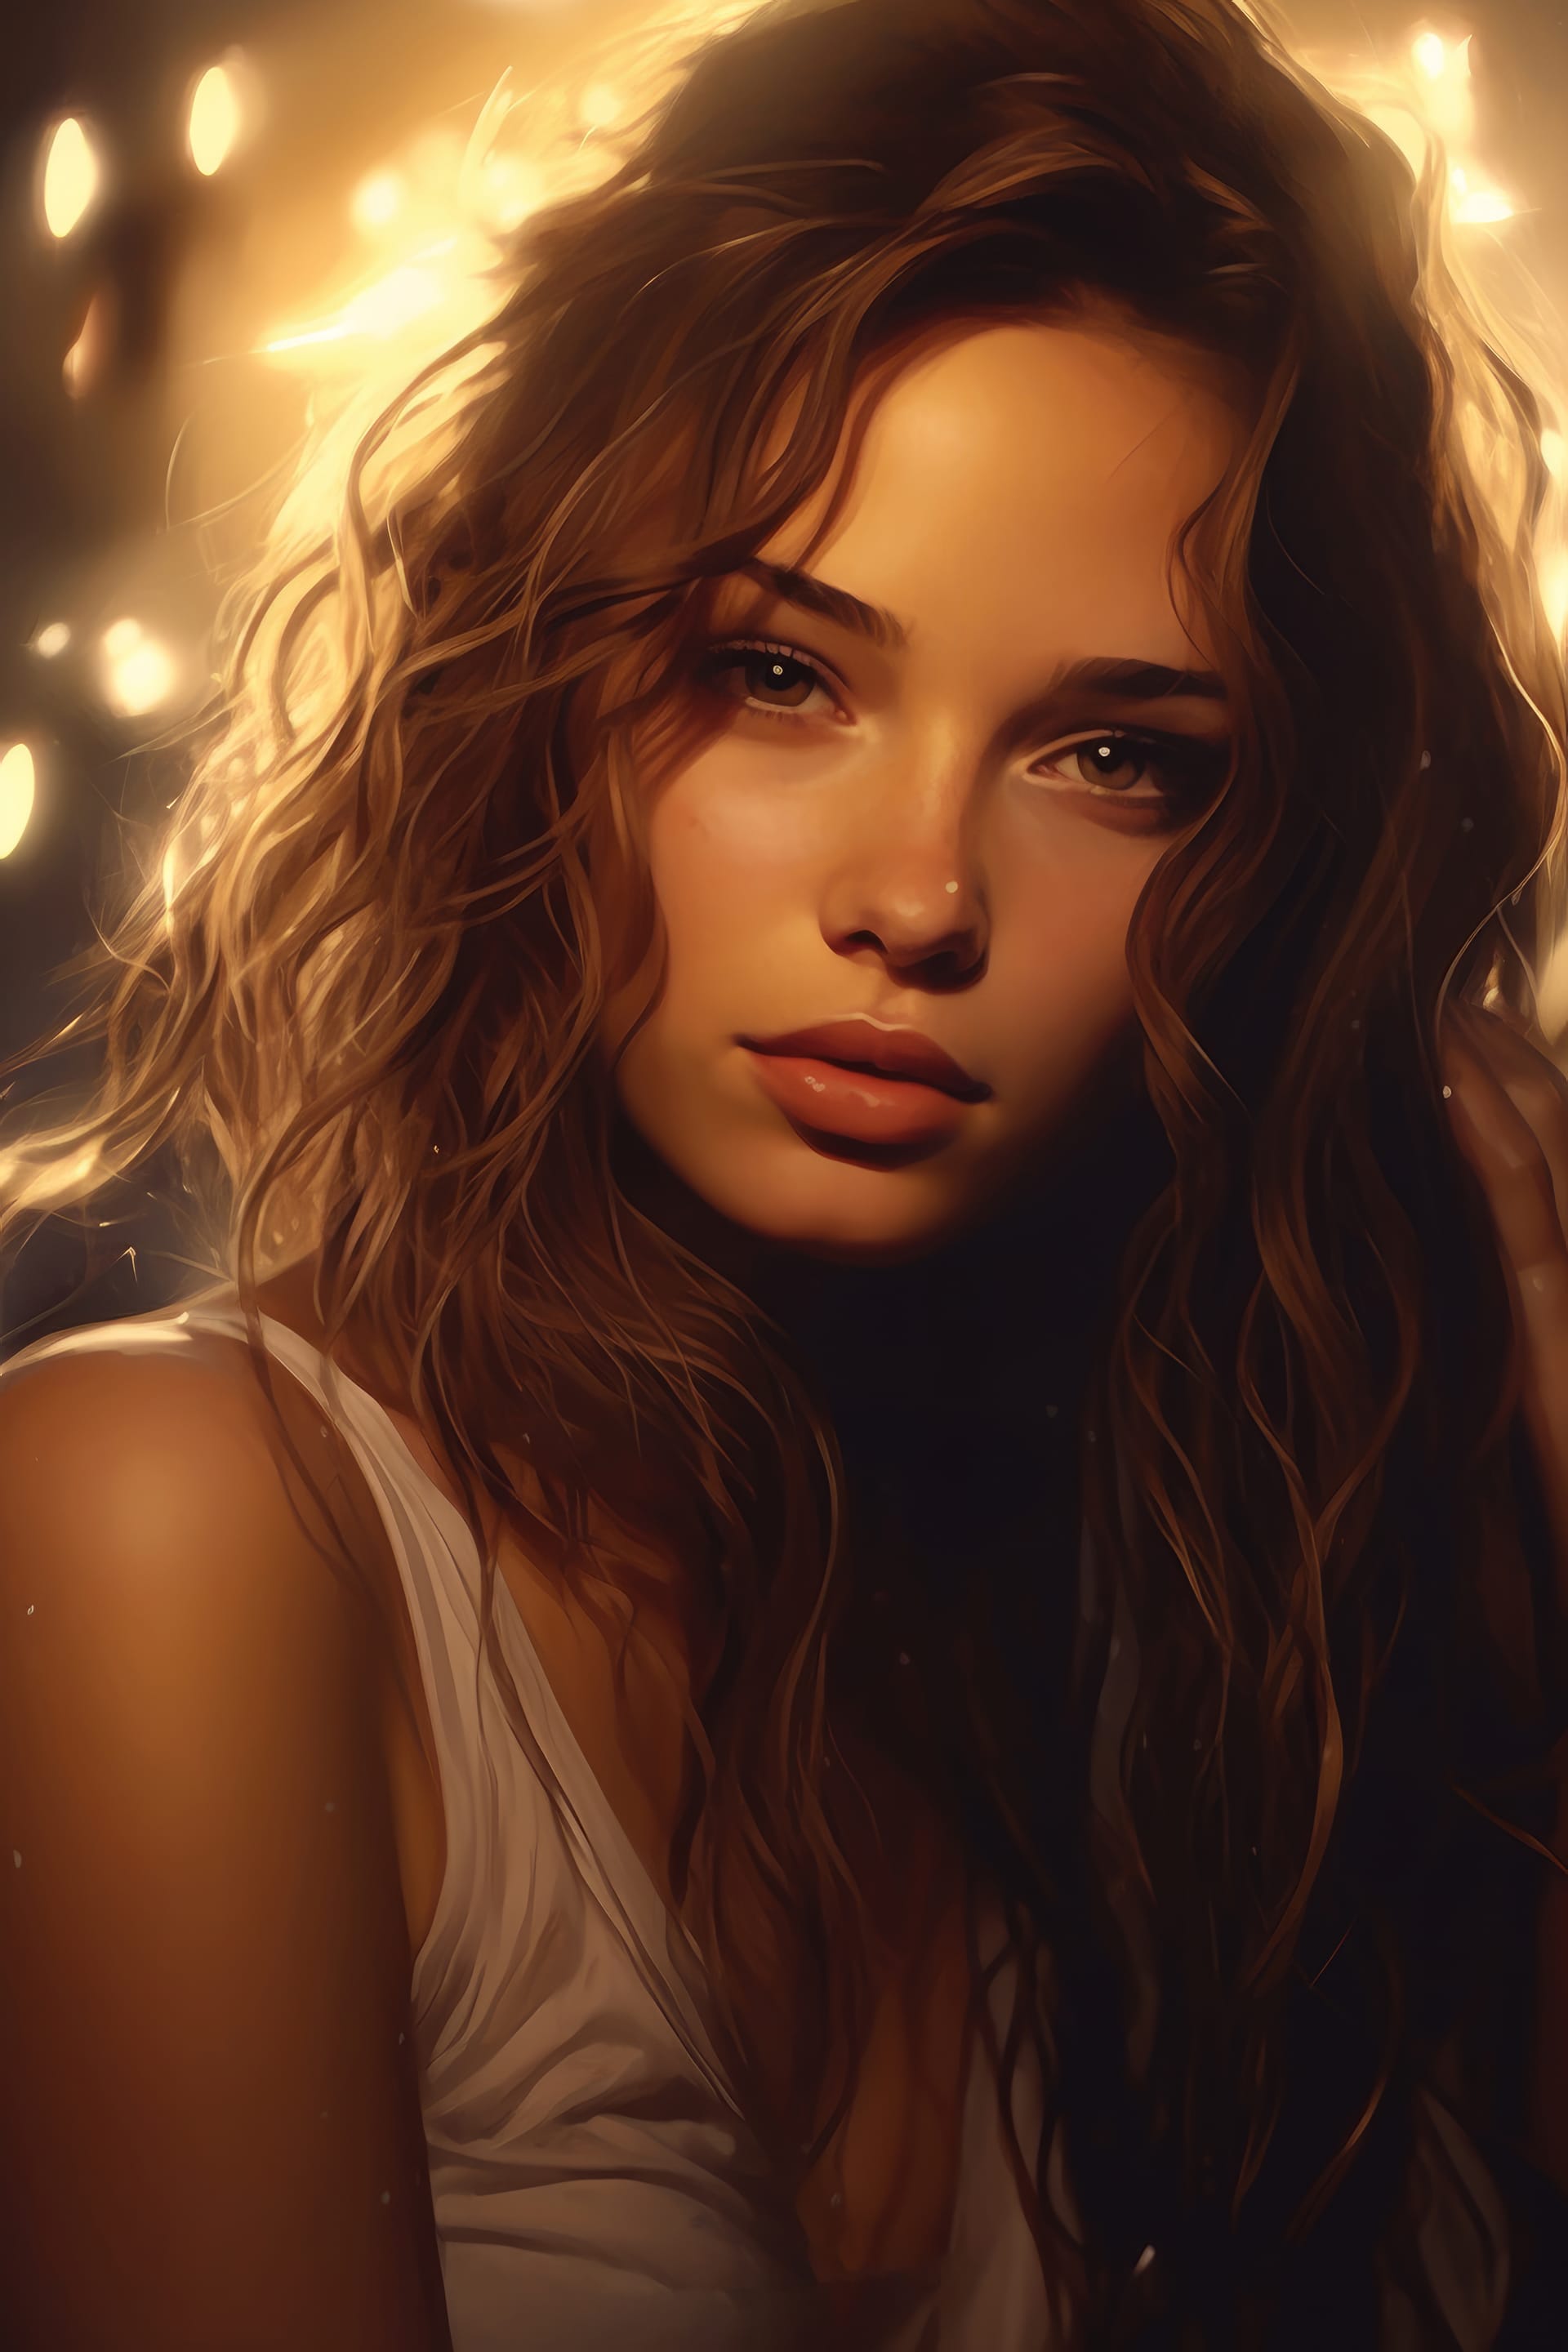 Intriguing portrait woman with long hair white shirt with golden glow